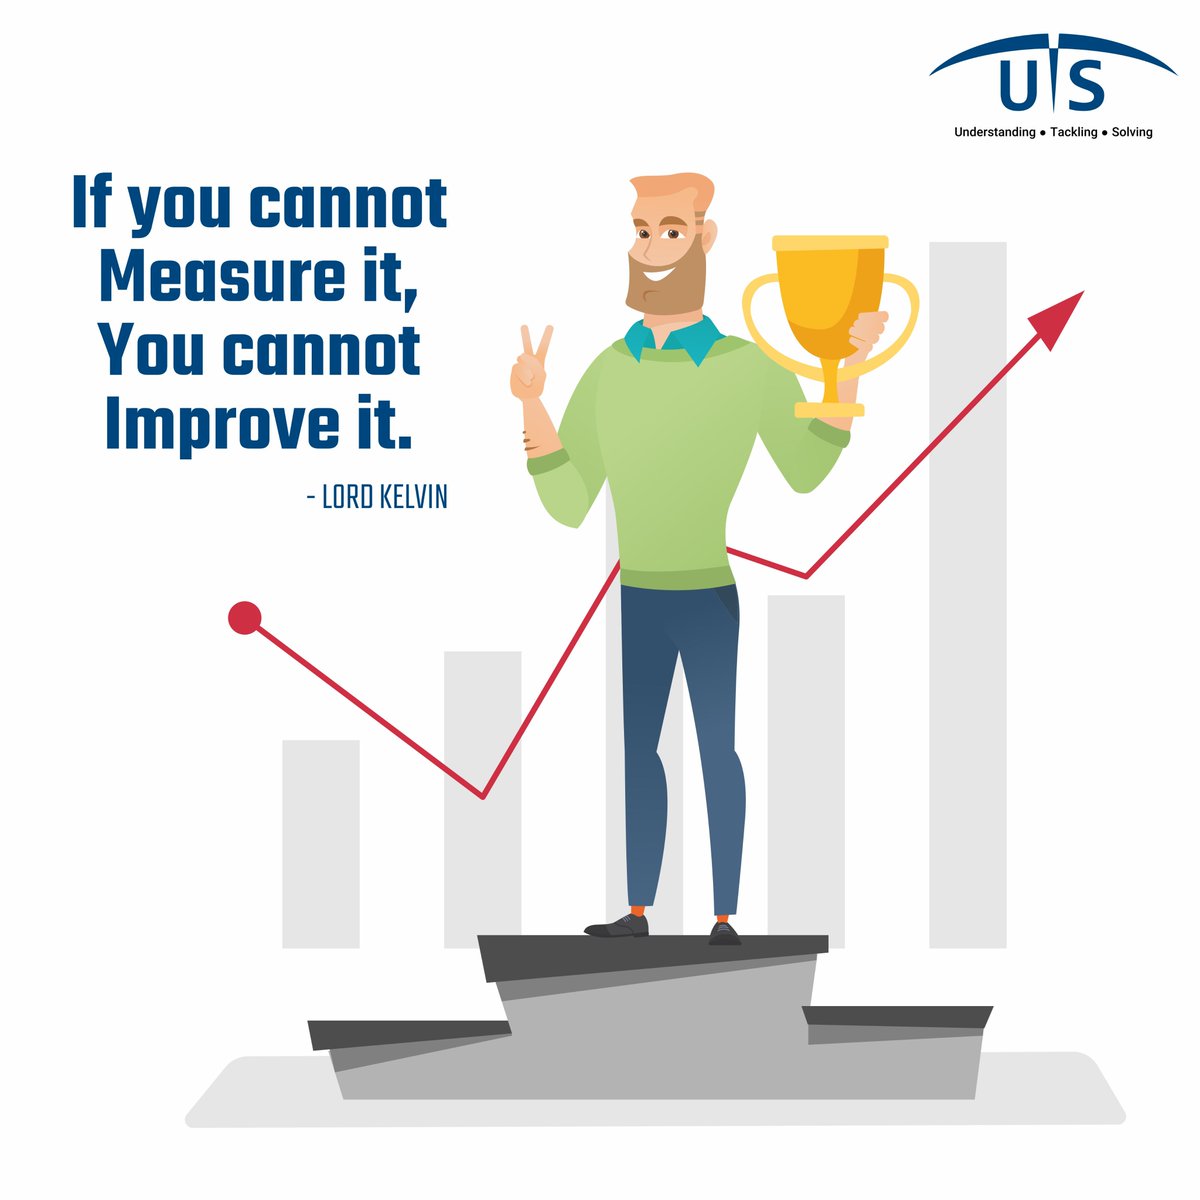 Unlock Your #business Potential with #UTSConsulting - Where Measuring Success Leads to Improvement! 📊💼

#BusinessConsulting #MetricsThatMatter #BusinessConsulting #MetricsThatMatter #UTSConsulting #MetricsThatMatter #BusinessGrowth #BusinessStrategy  #businessowners